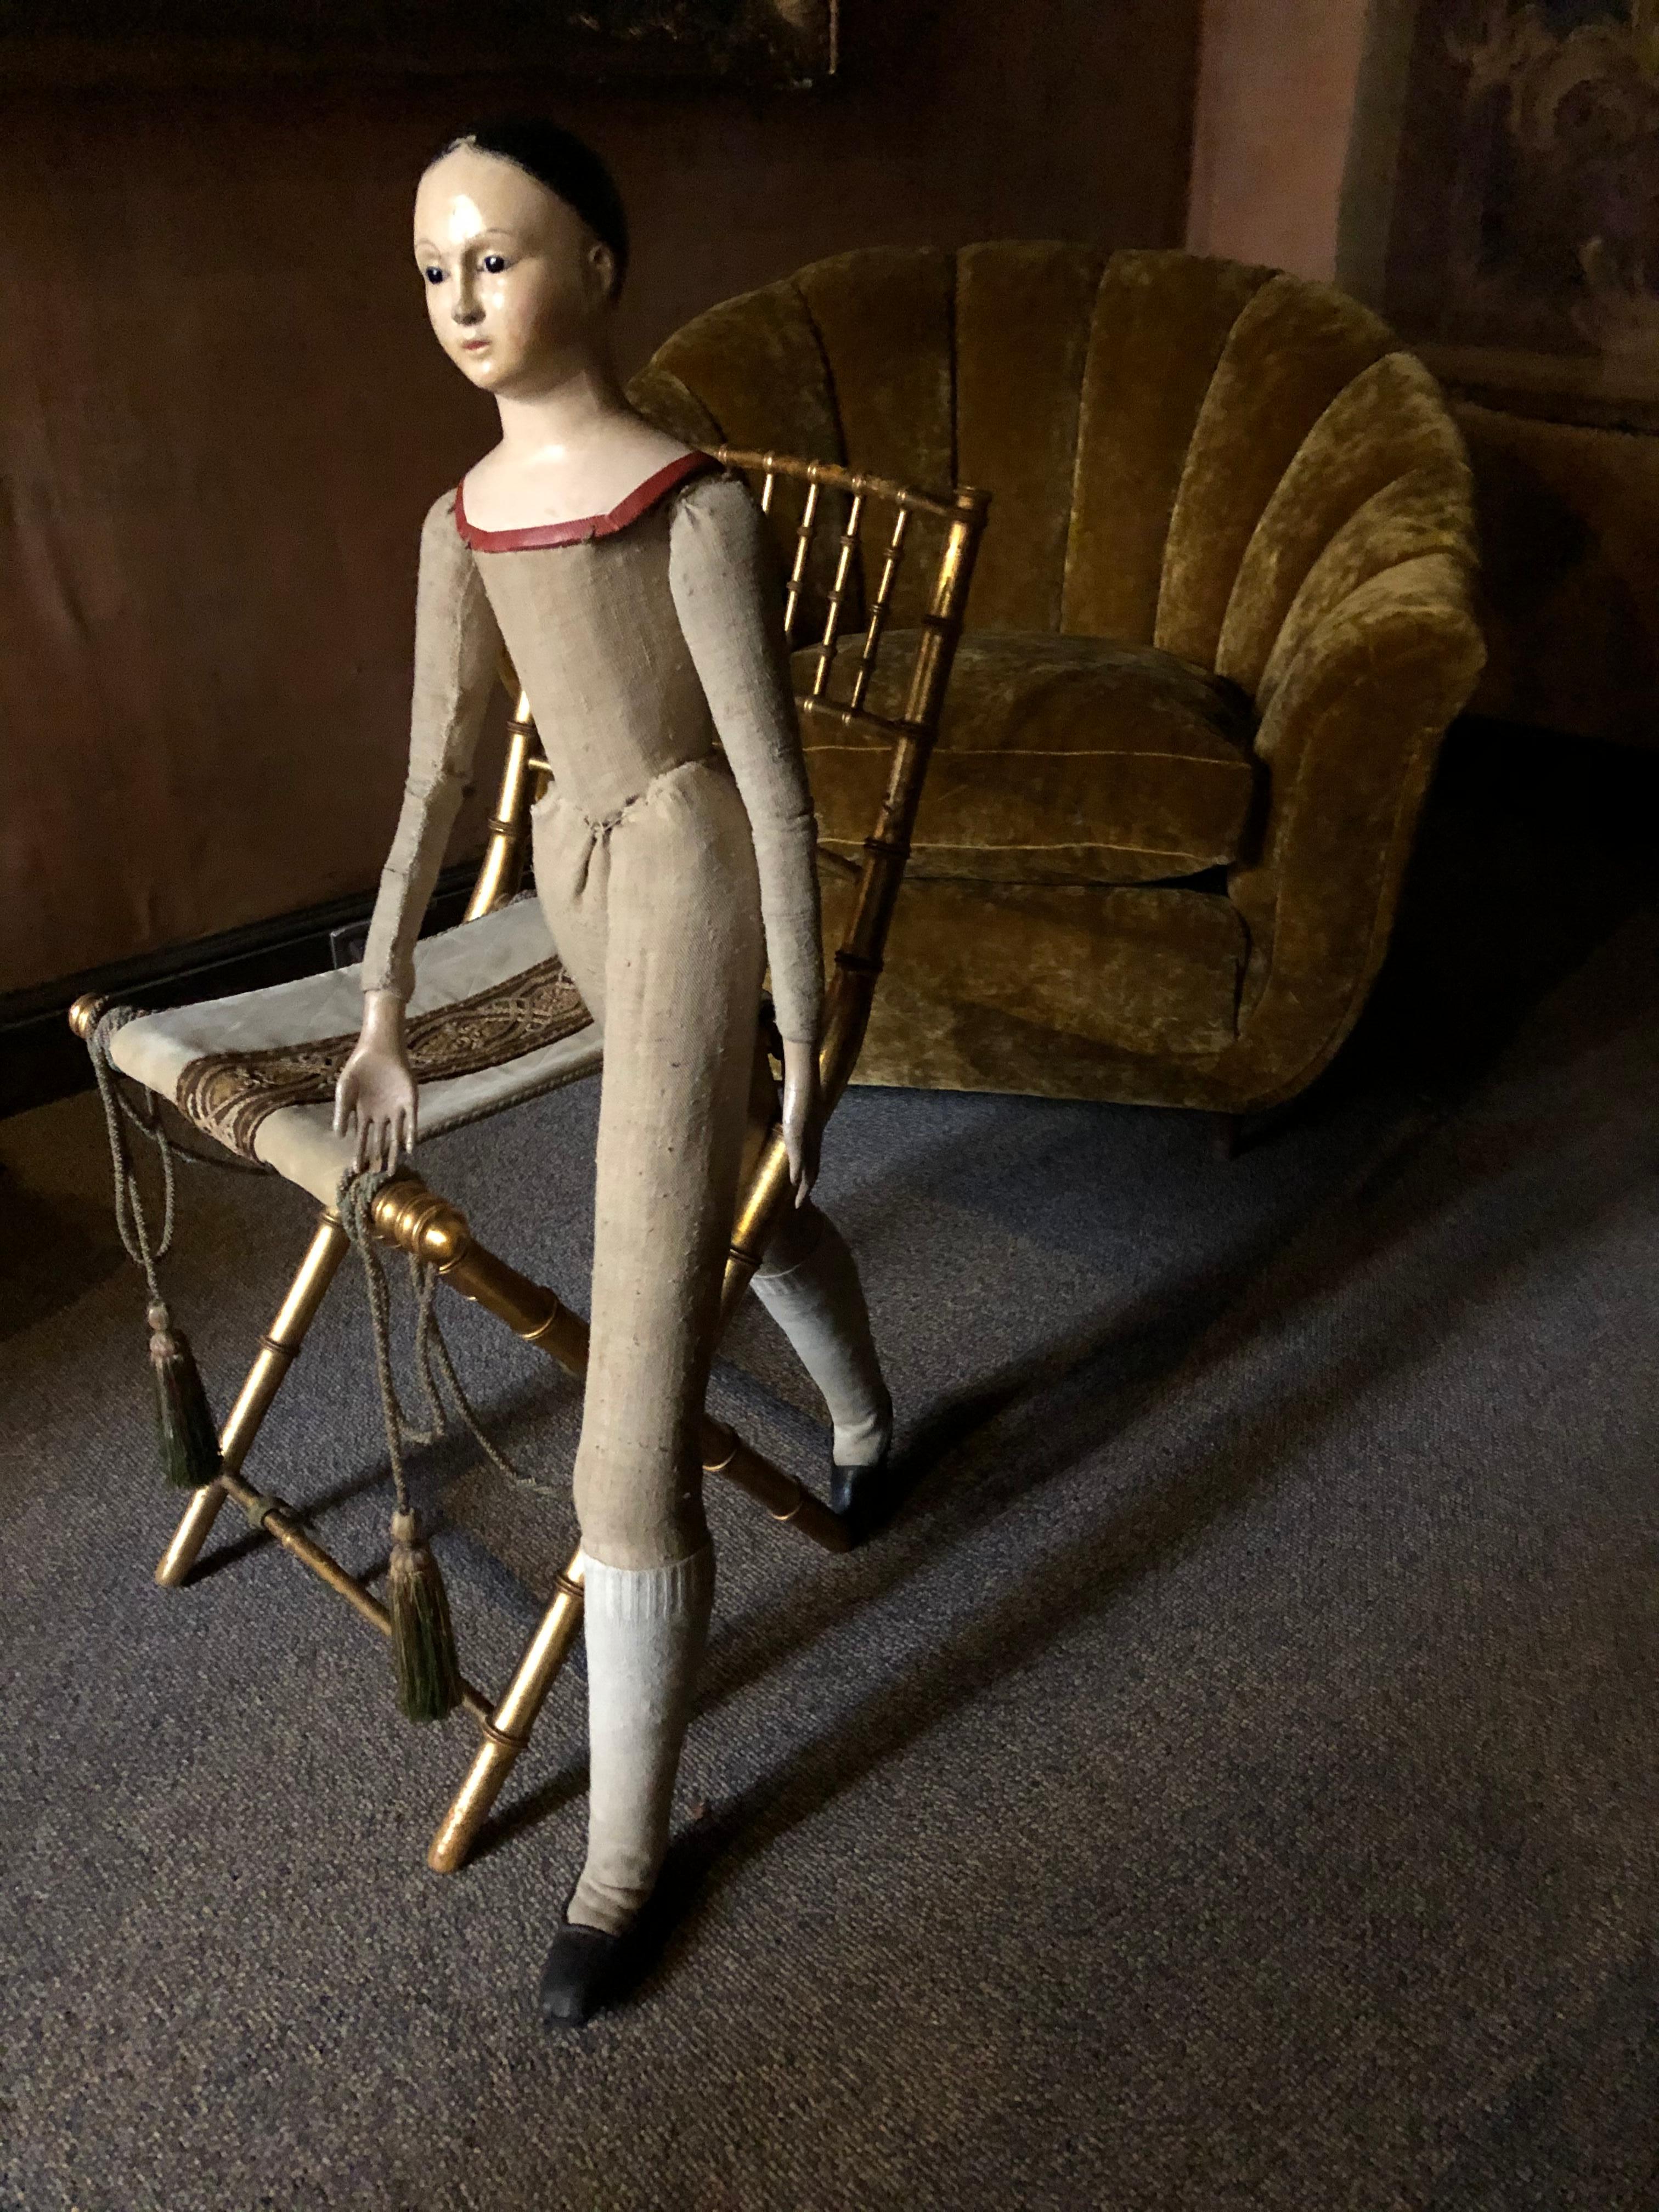 Early 19th century collector’s doll, polychrome papier mâché head from the famous Voit house
Body in wood and fabrics. The lines of the hand are sculpted.
Original stockings and shoes
Sulphide eyes,
circa 1800,
France.